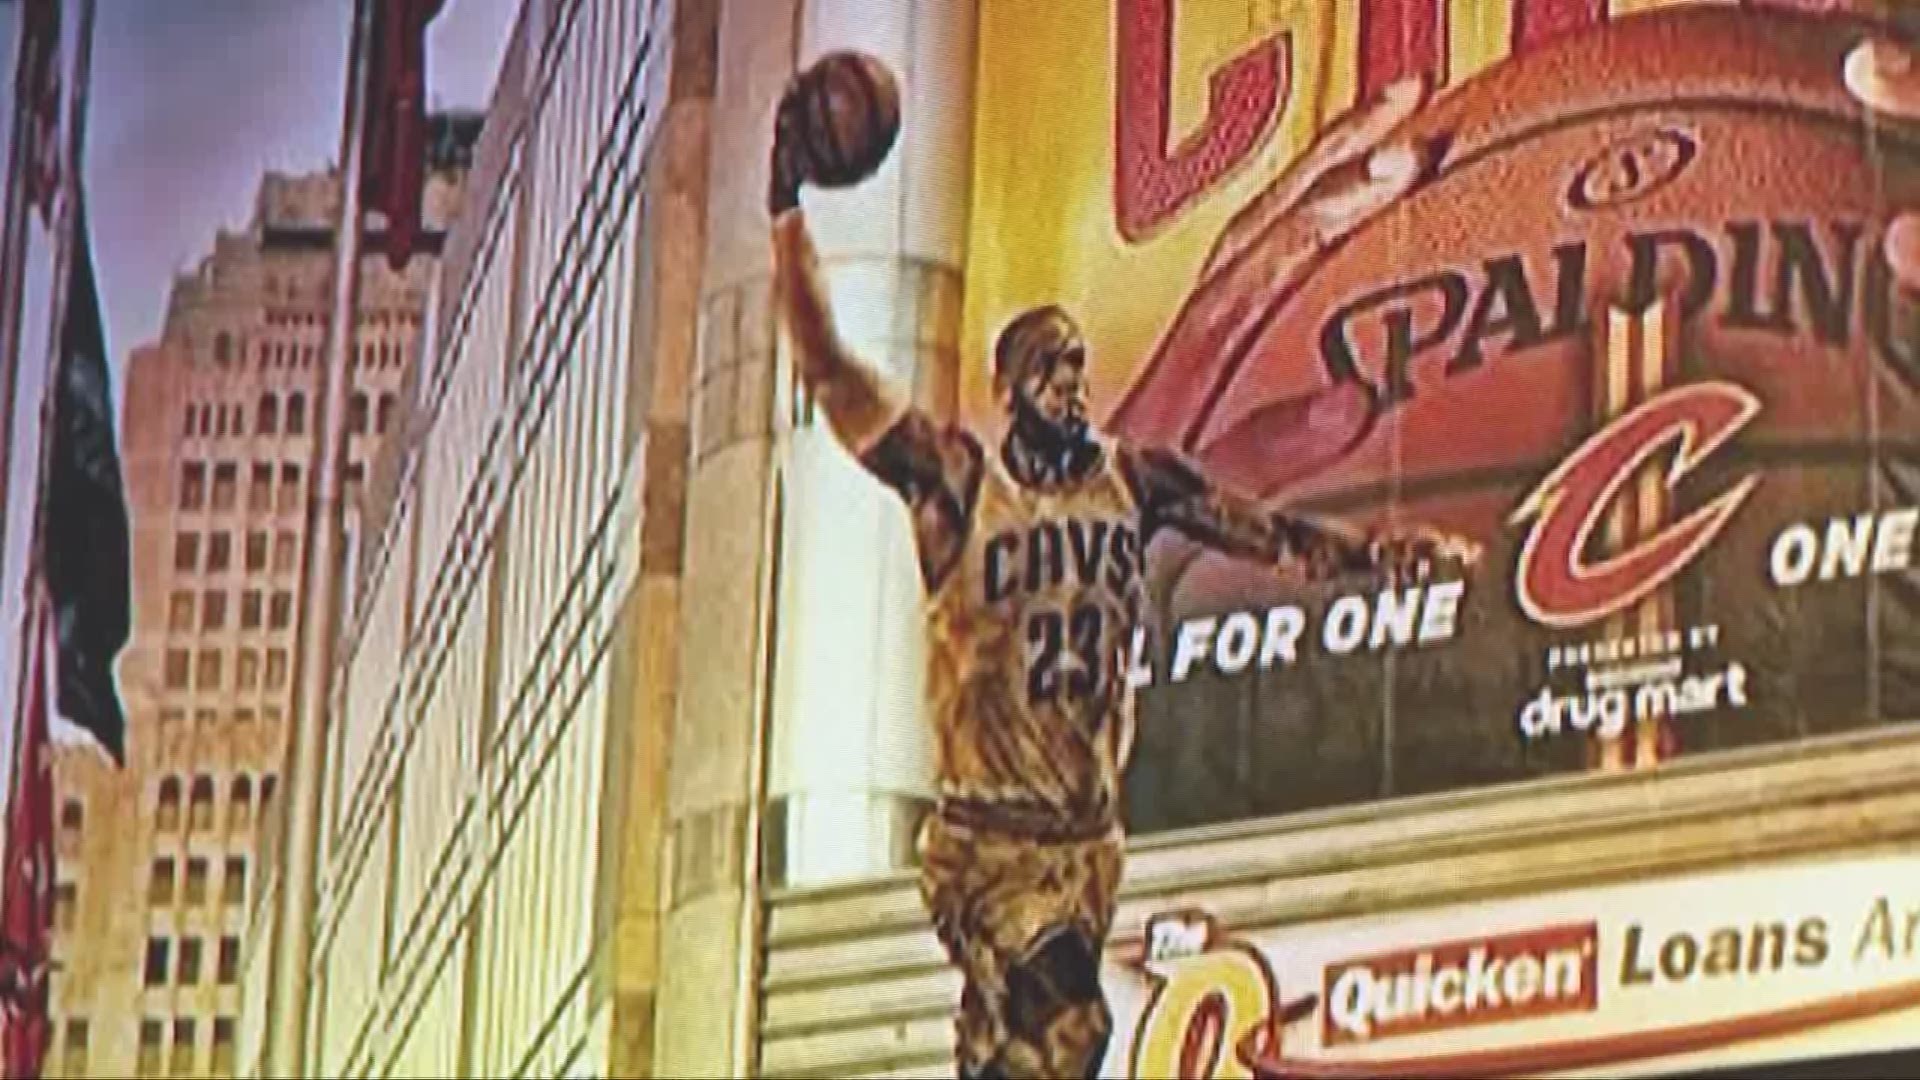 Group of local pastors call for LeBron James statute 